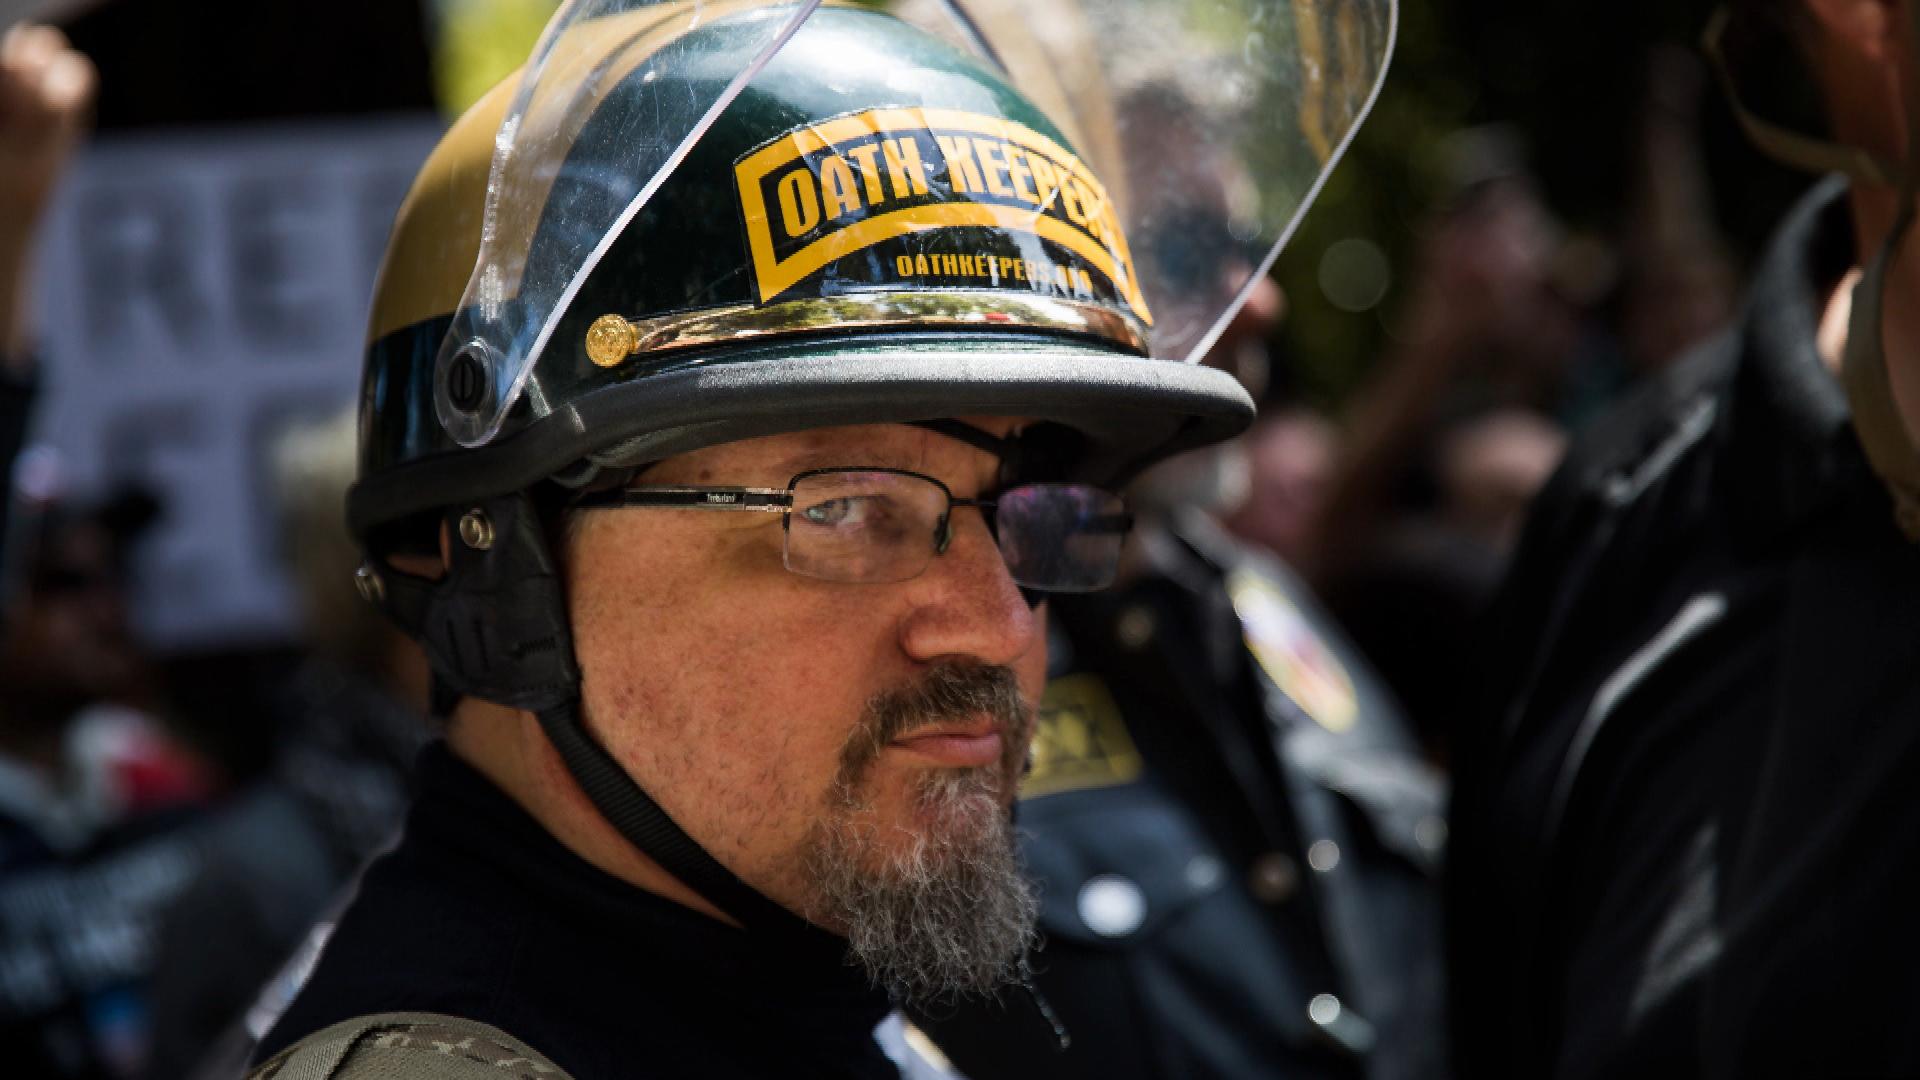 Indicted Oath Keepers Founder ‘Acted Cowardly’ on Jan. 6, Says Ex-Wife and Cofounder